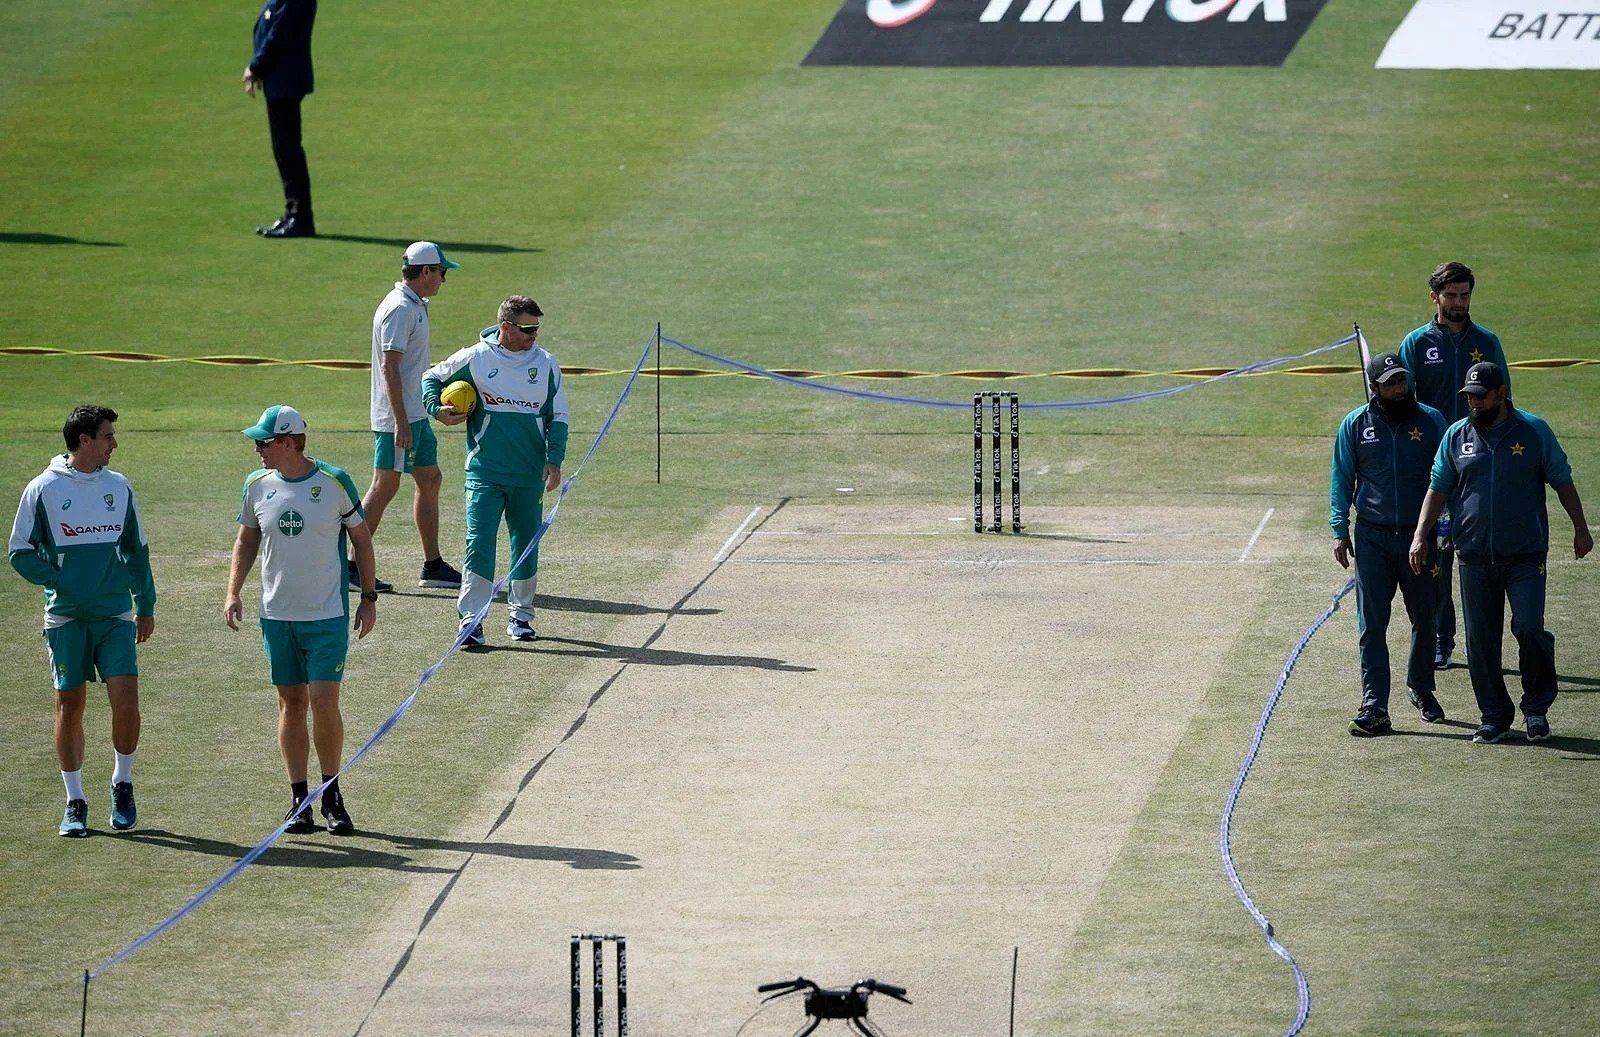 Rawalpindi pitch was rated below average by the ICC and has been handed one demerit point